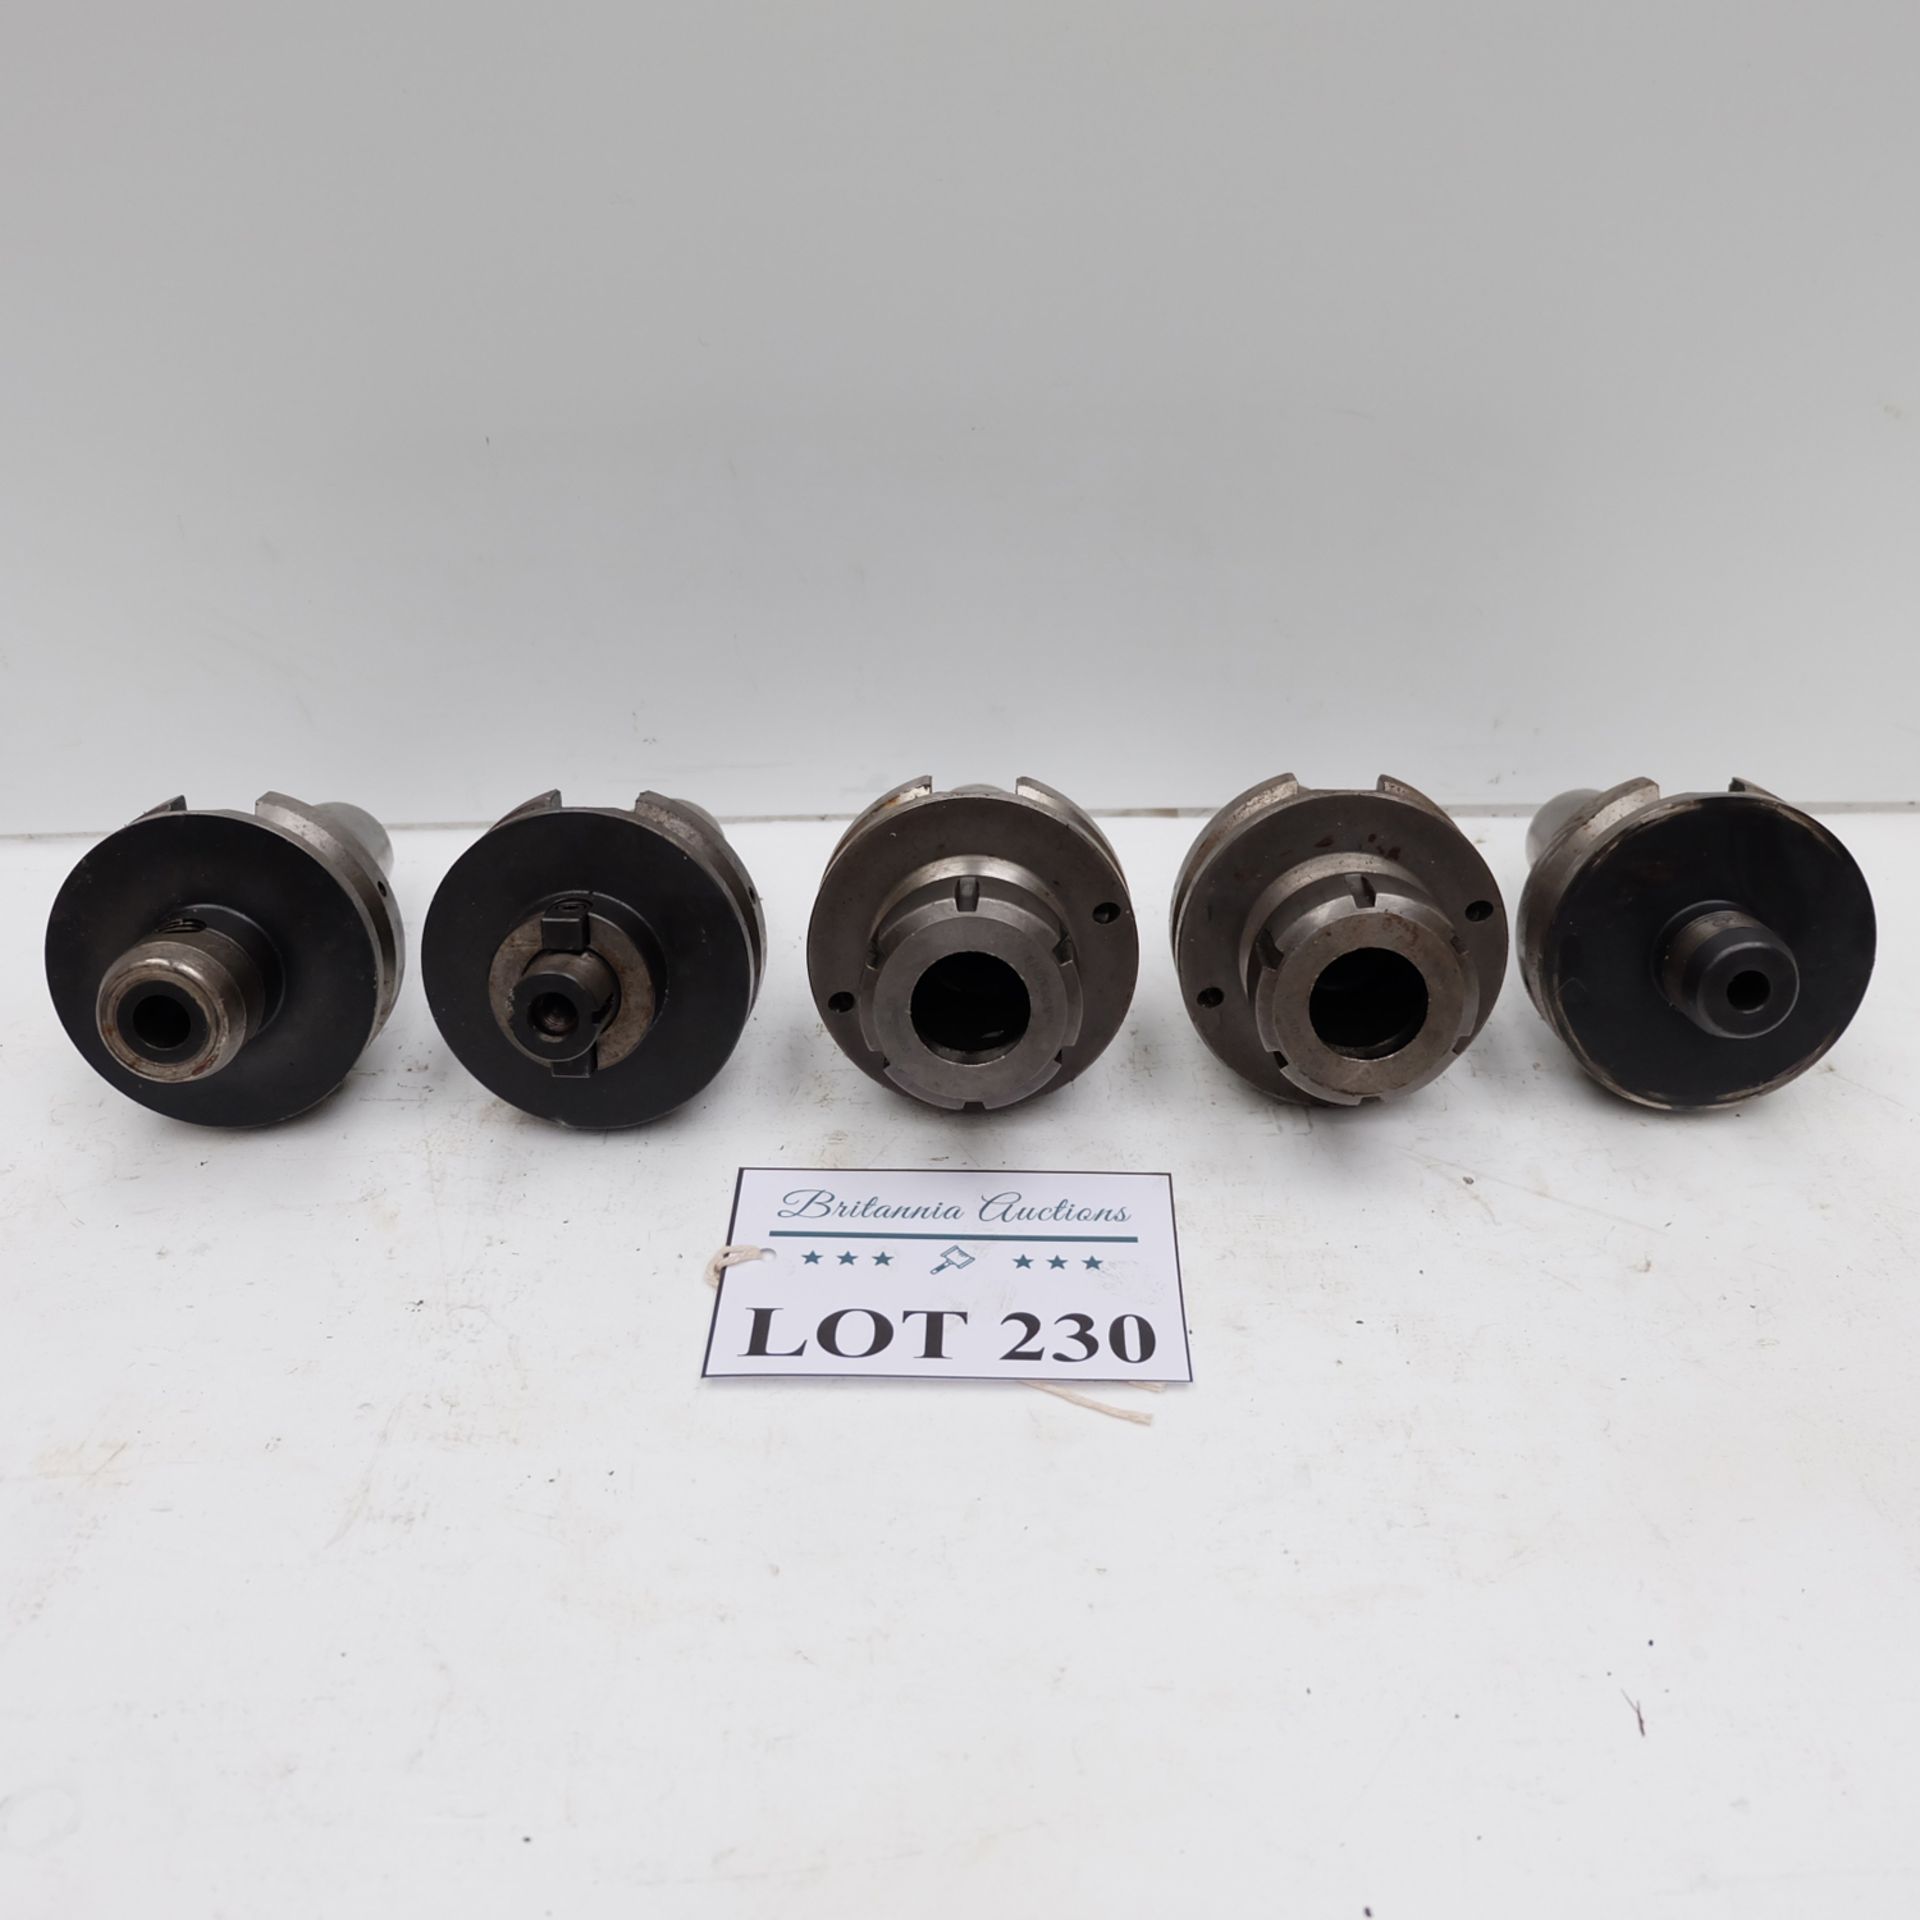 Quantity of 5 x BT 50 Spindle Tooling. - Image 3 of 3